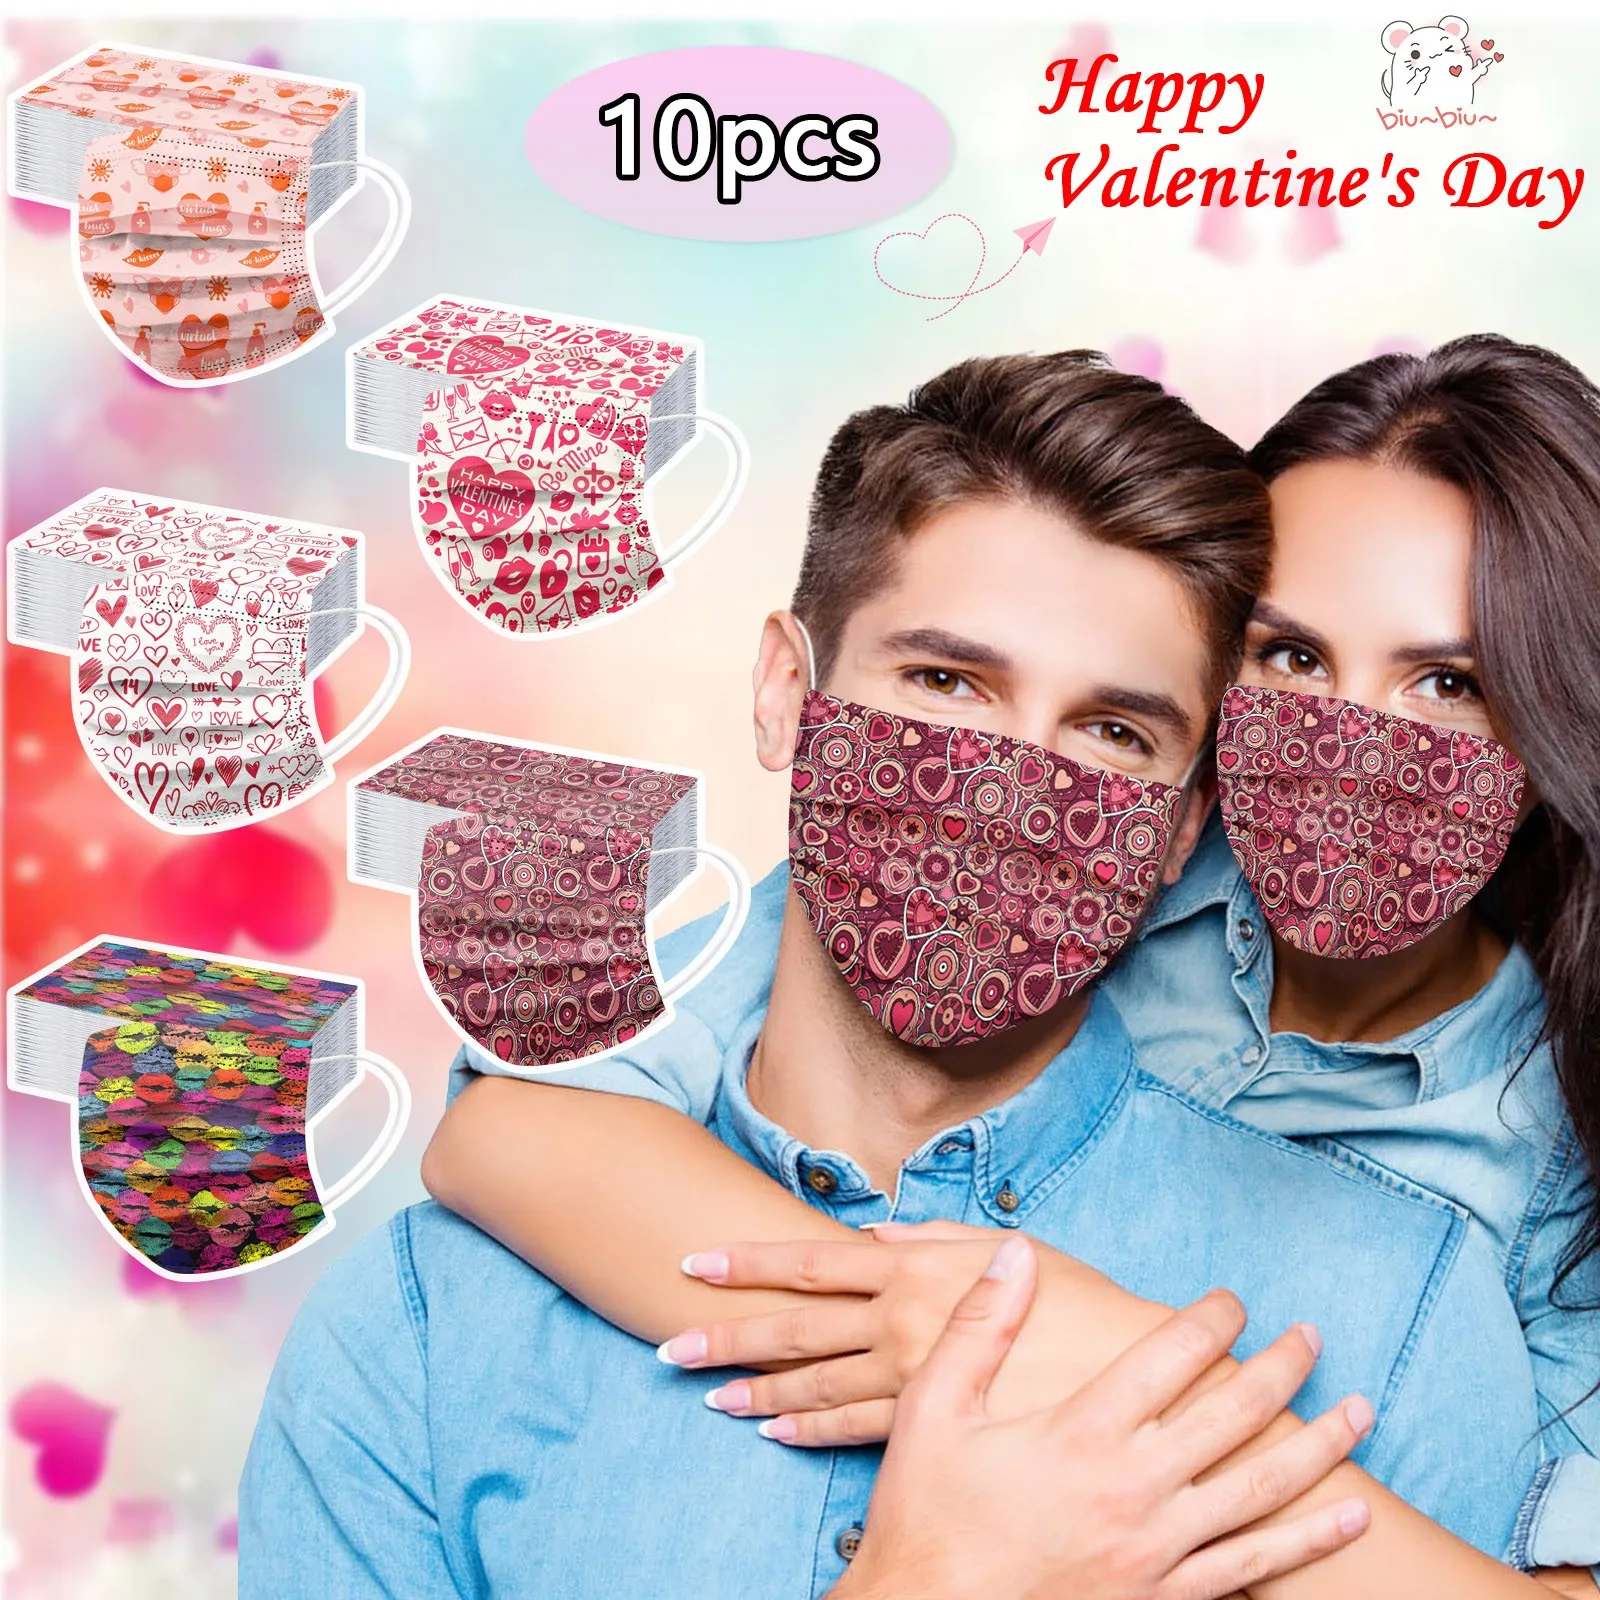 family of 3 halloween costumes 10PC Mascarillas Adult Disposable Mask Valentine's Day Heart Love Print Face Mask Protective Desechables Halloween Cosplay Mask unique halloween costumes